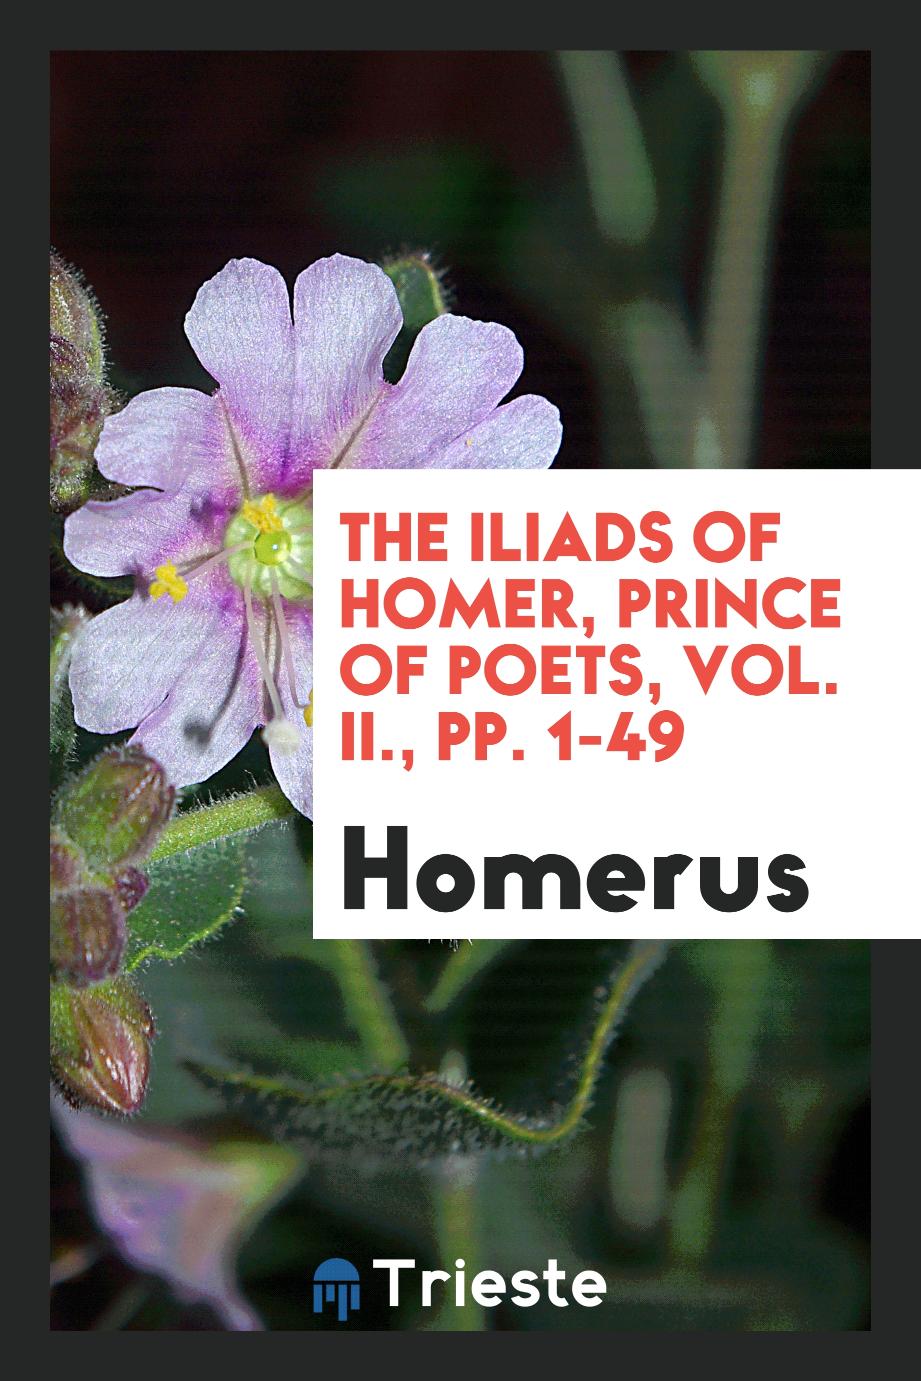 The Iliads of Homer, prince of poets, Vol. II., pp. 1-49